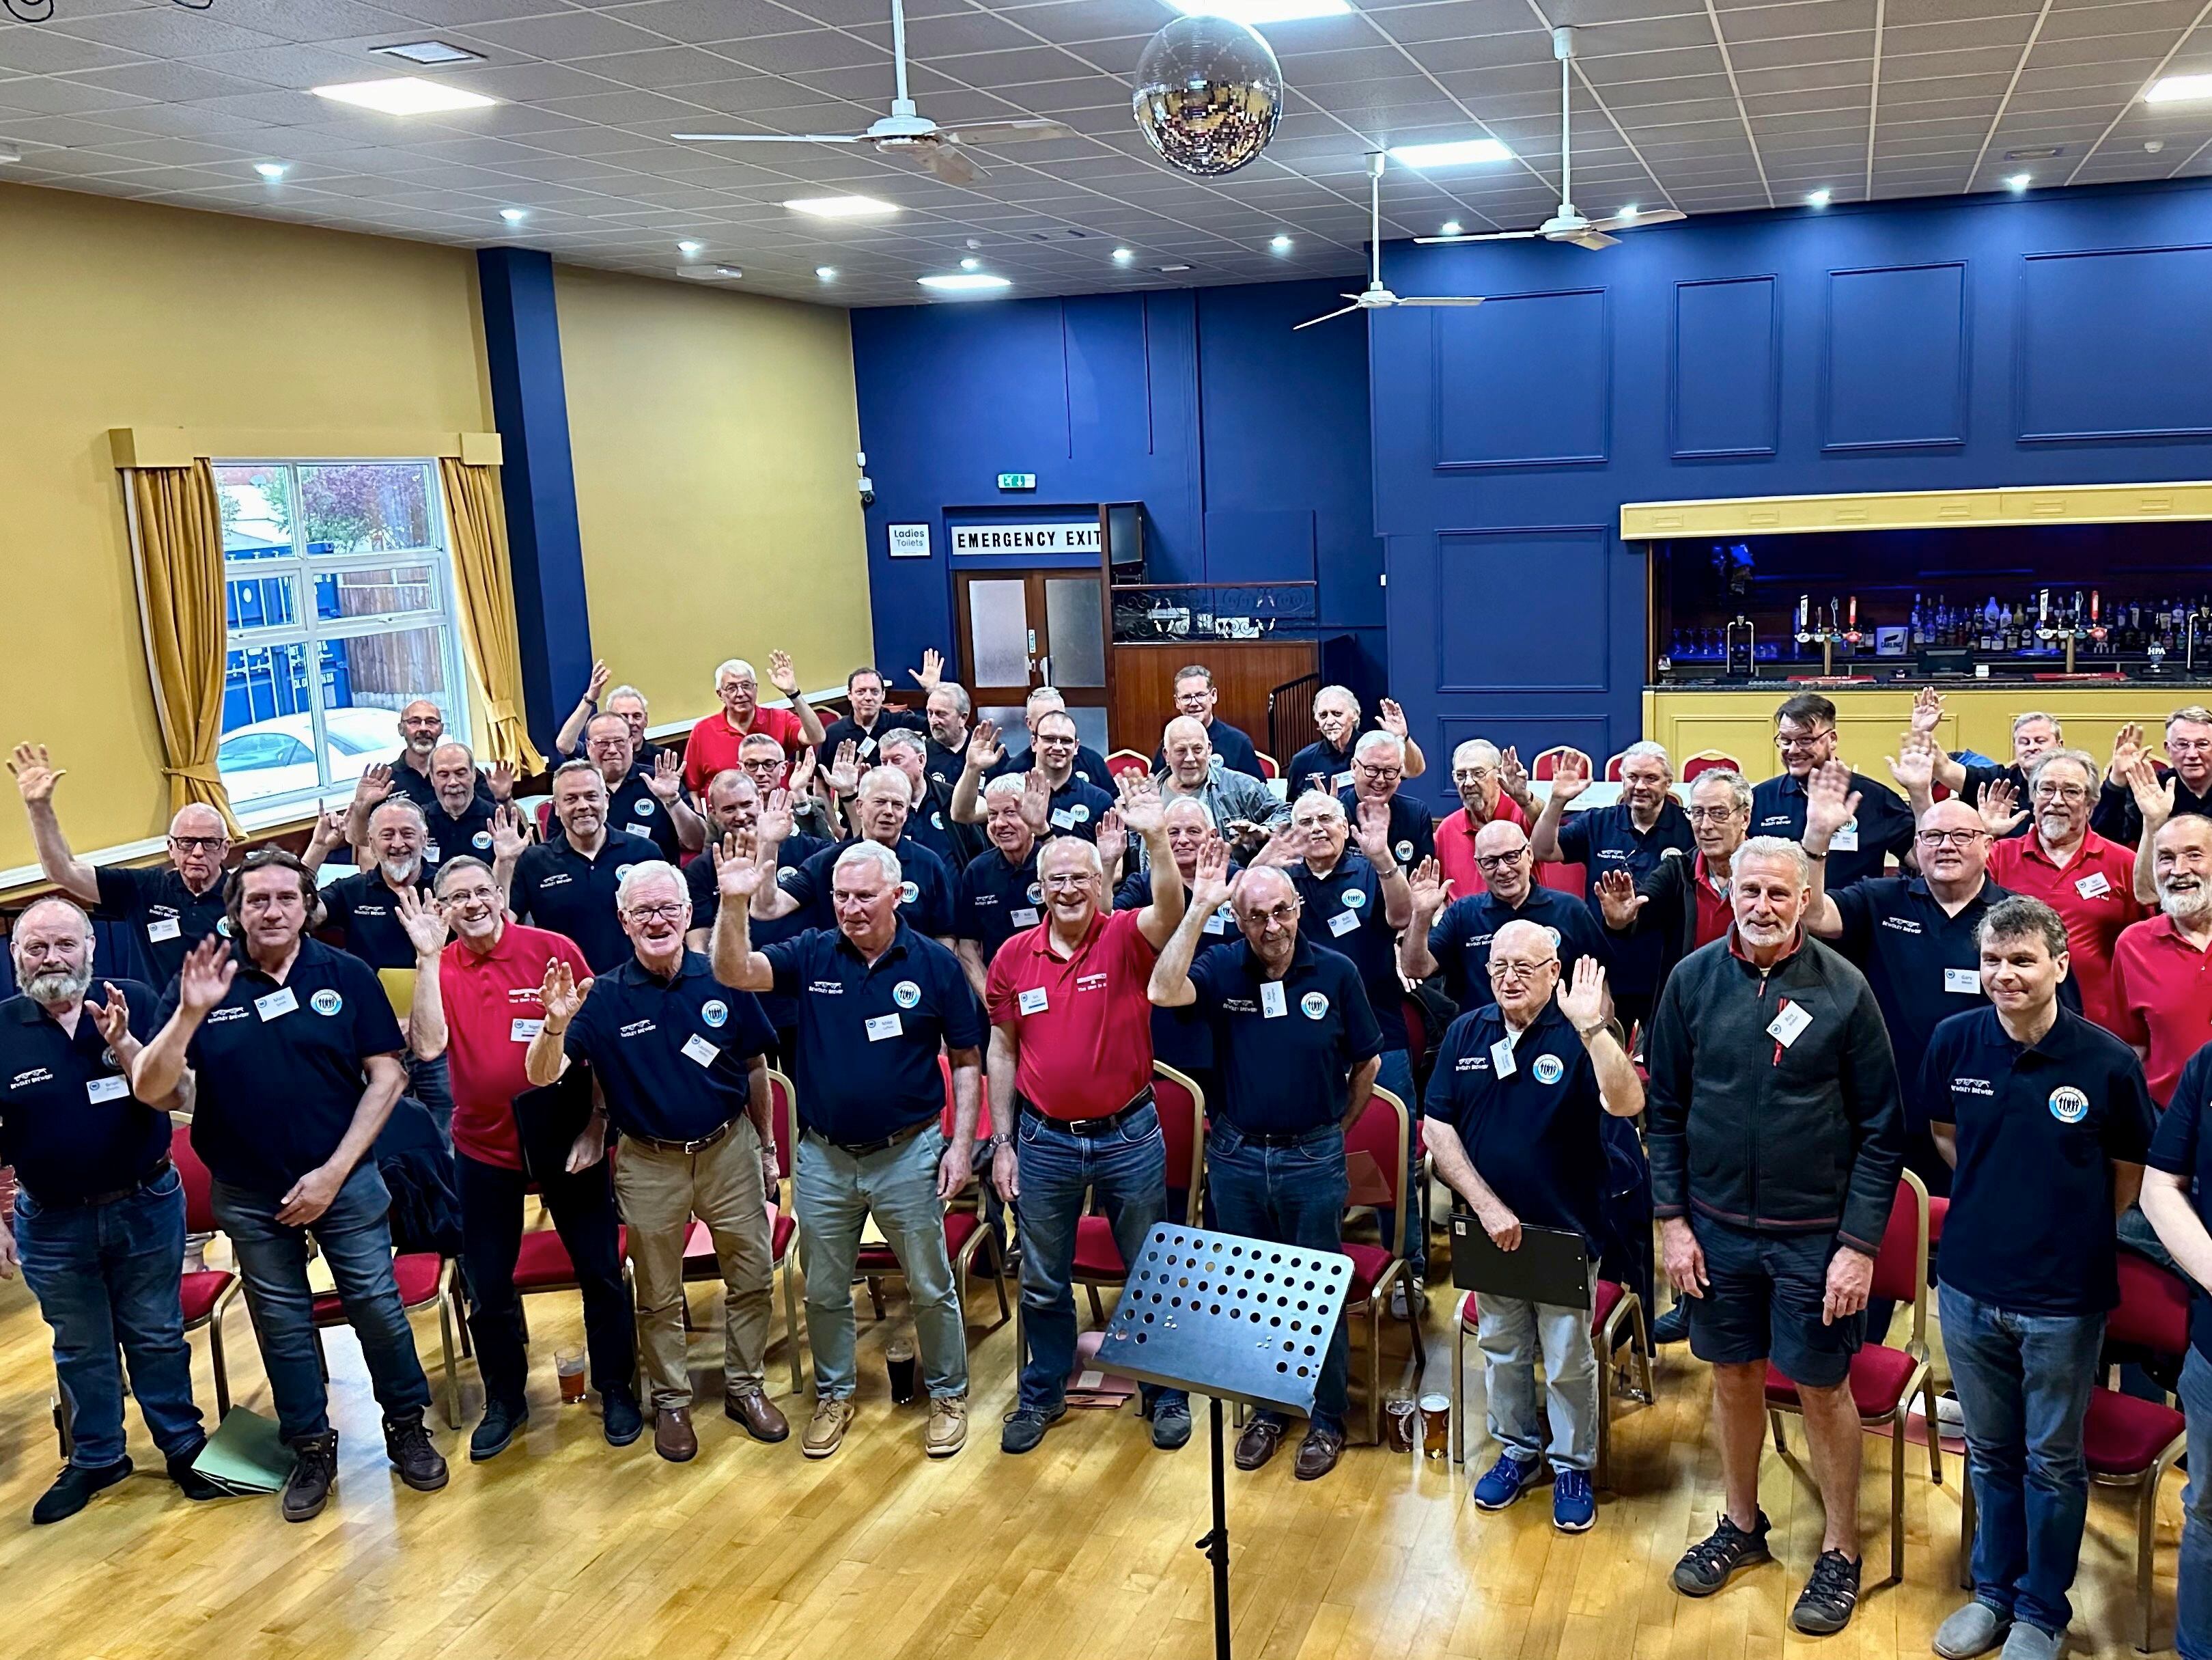 New choir set to perform for charity after 42 men answered appeal to sing